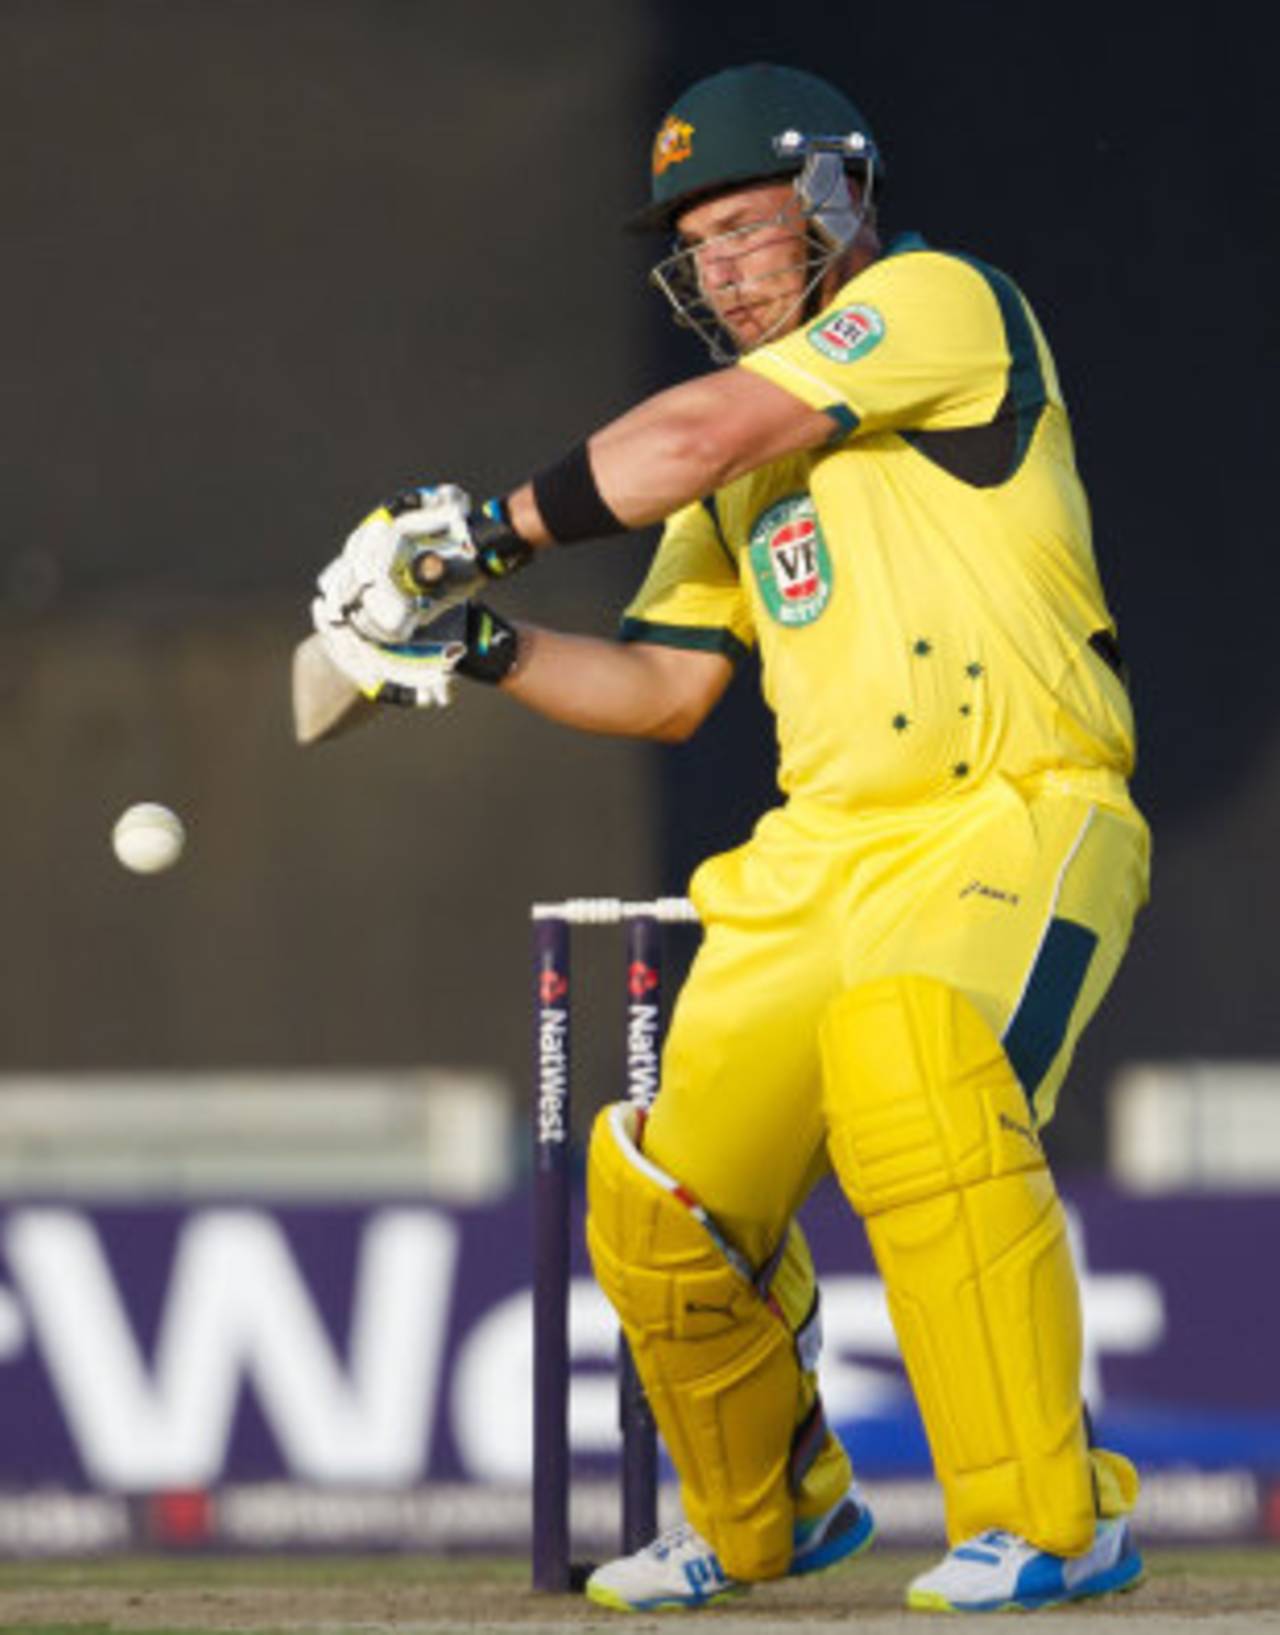 Aaron Finch blazed his way with 14 sixes, England v Australia, 1st T20, Ageas Bowl, August 29, 2013